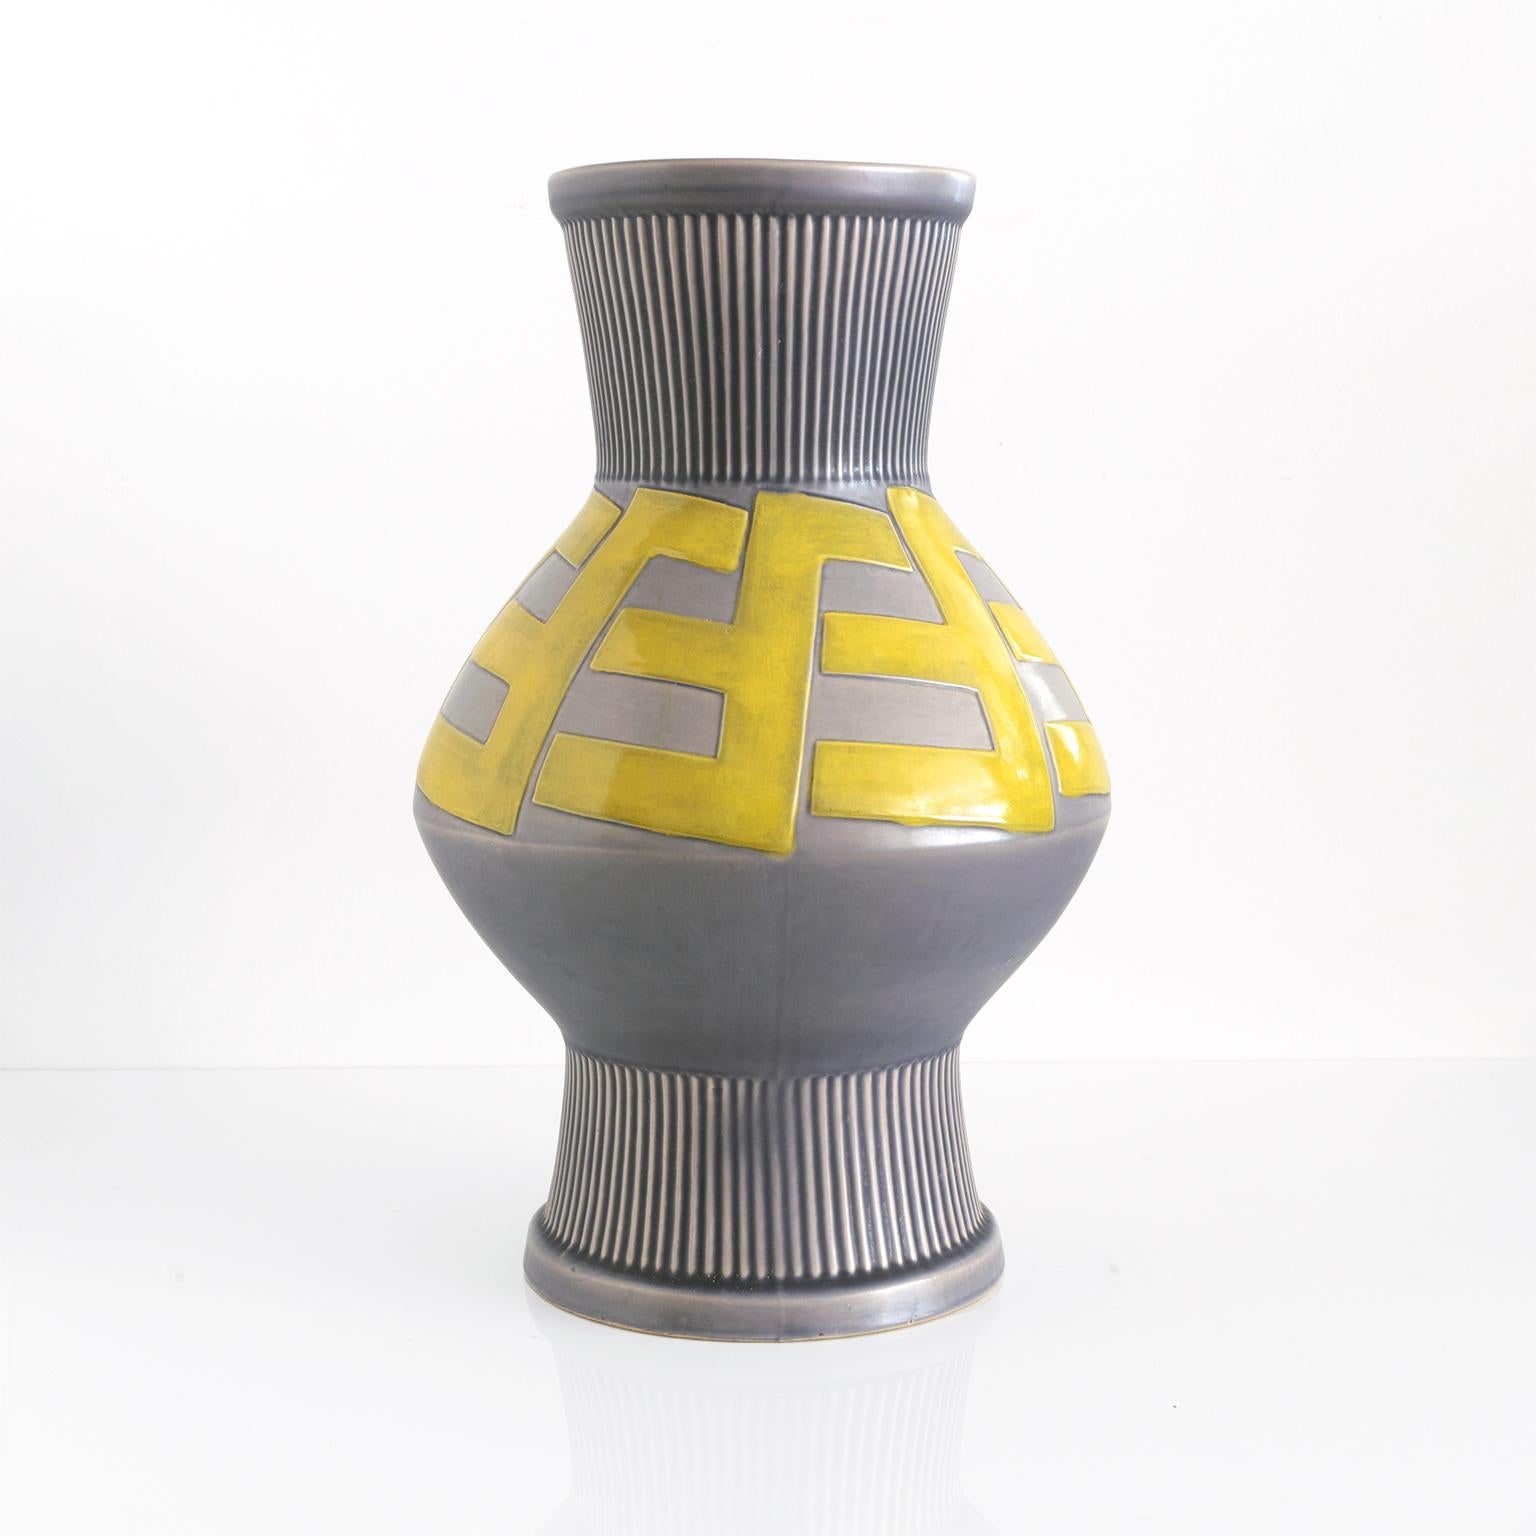 Large Swedish Art Deco ceramic vase with a raised bold pattern in a golden glaze on a grayish blue background. Designed by artist Ewald Dahlskog for Bo Fajans circa 1930's. Measures: Height 17.5